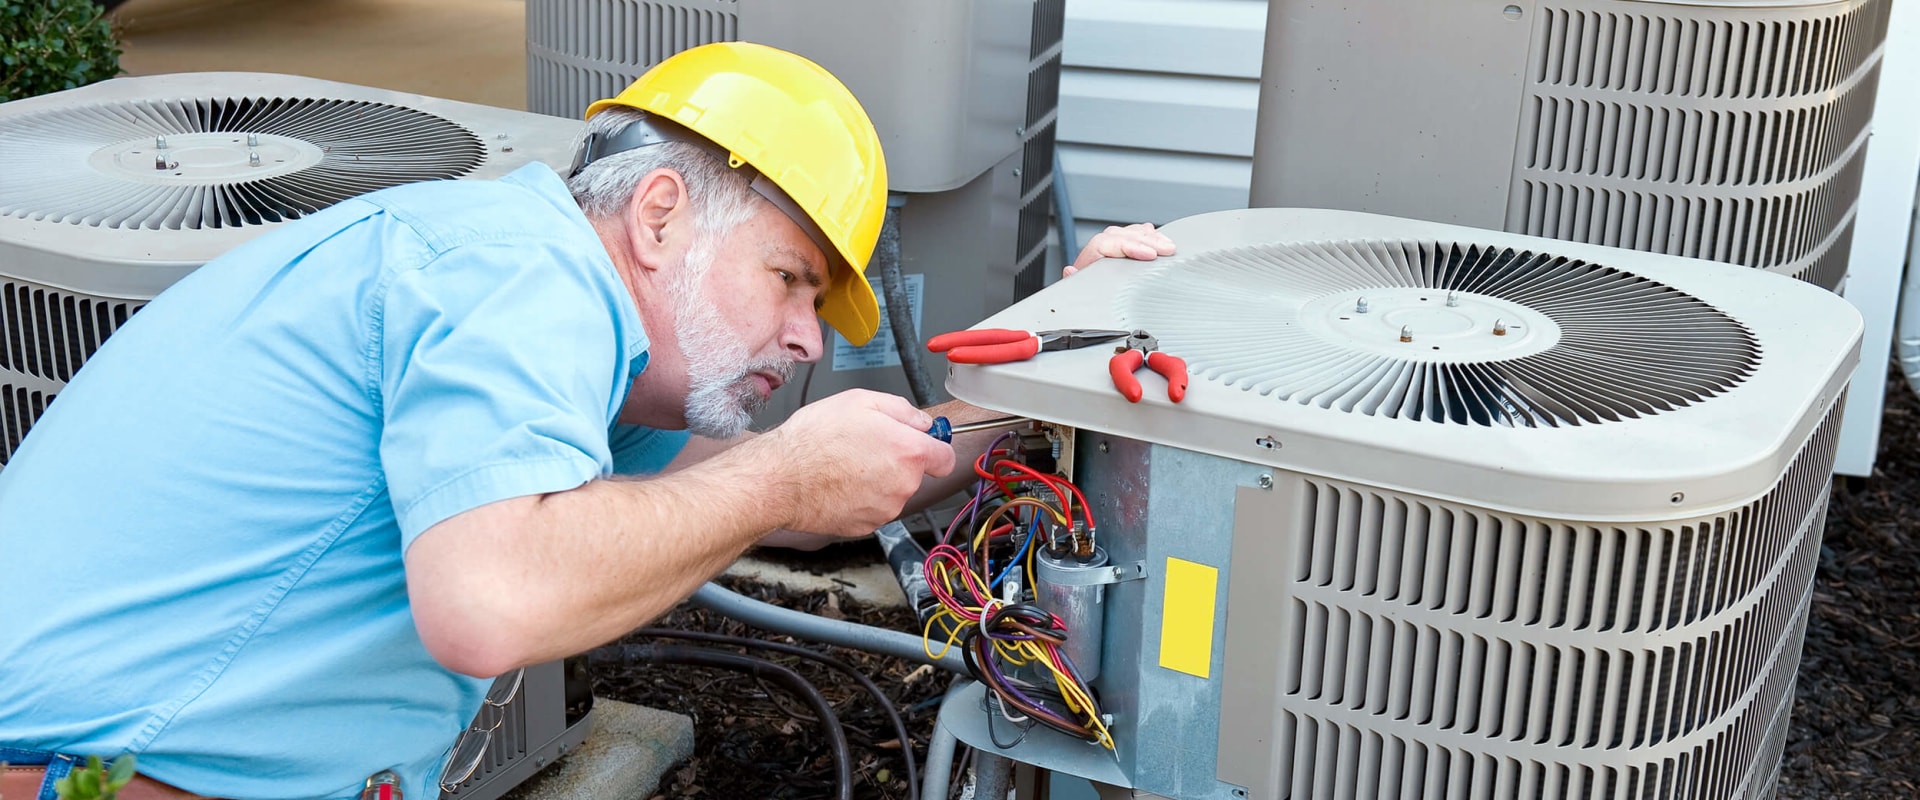 Preventative Measures to Reduce the Need for Frequent HVAC Maintenance in Broward County, FL